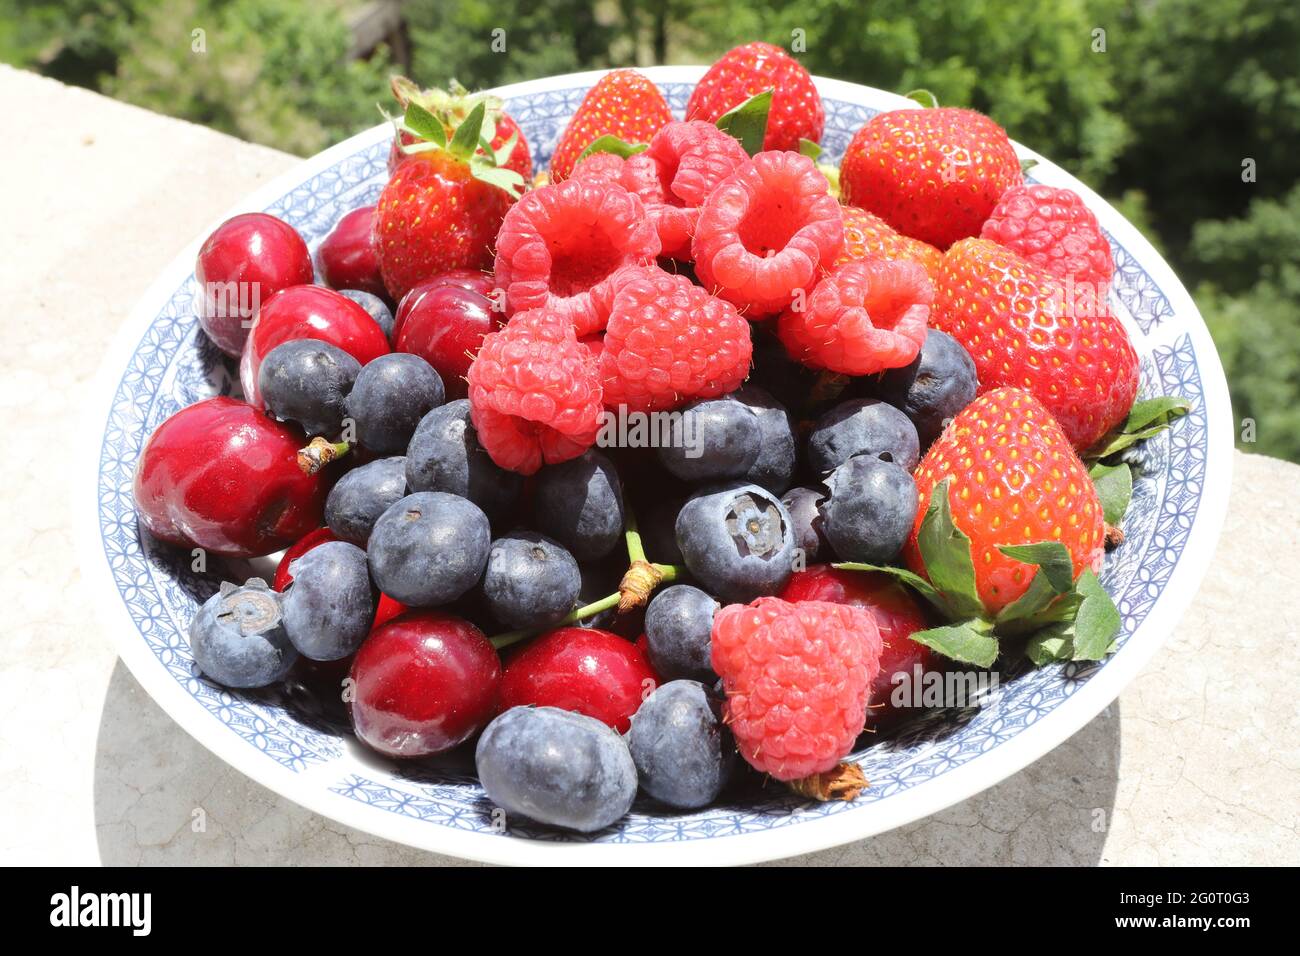 Close up of fresh fruits and berries on daylight Stock Photo